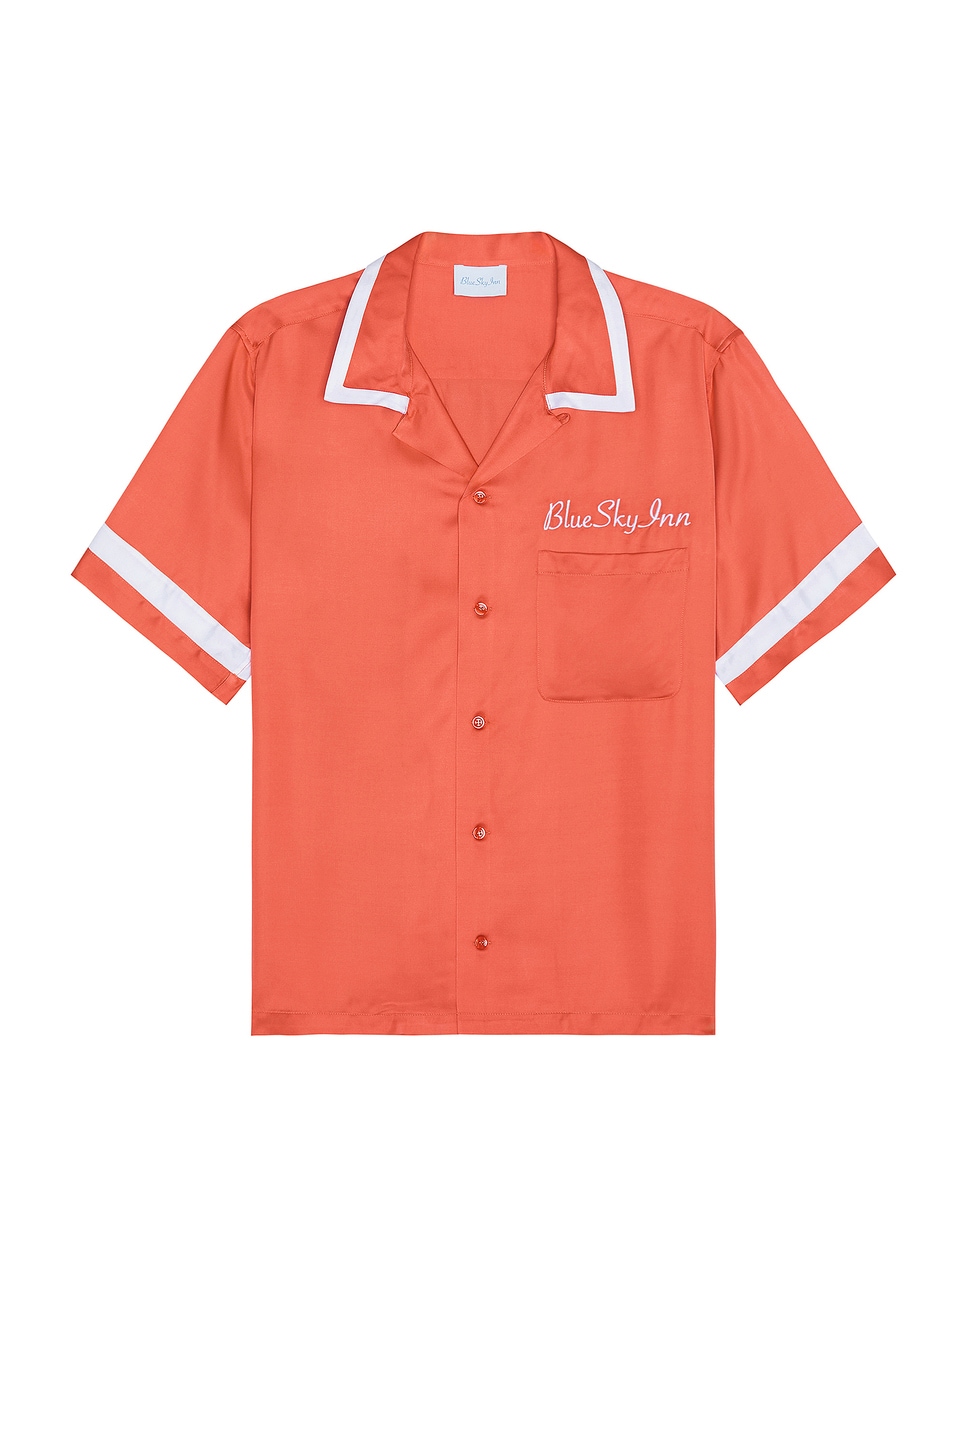 Waiter Shirt in Coral